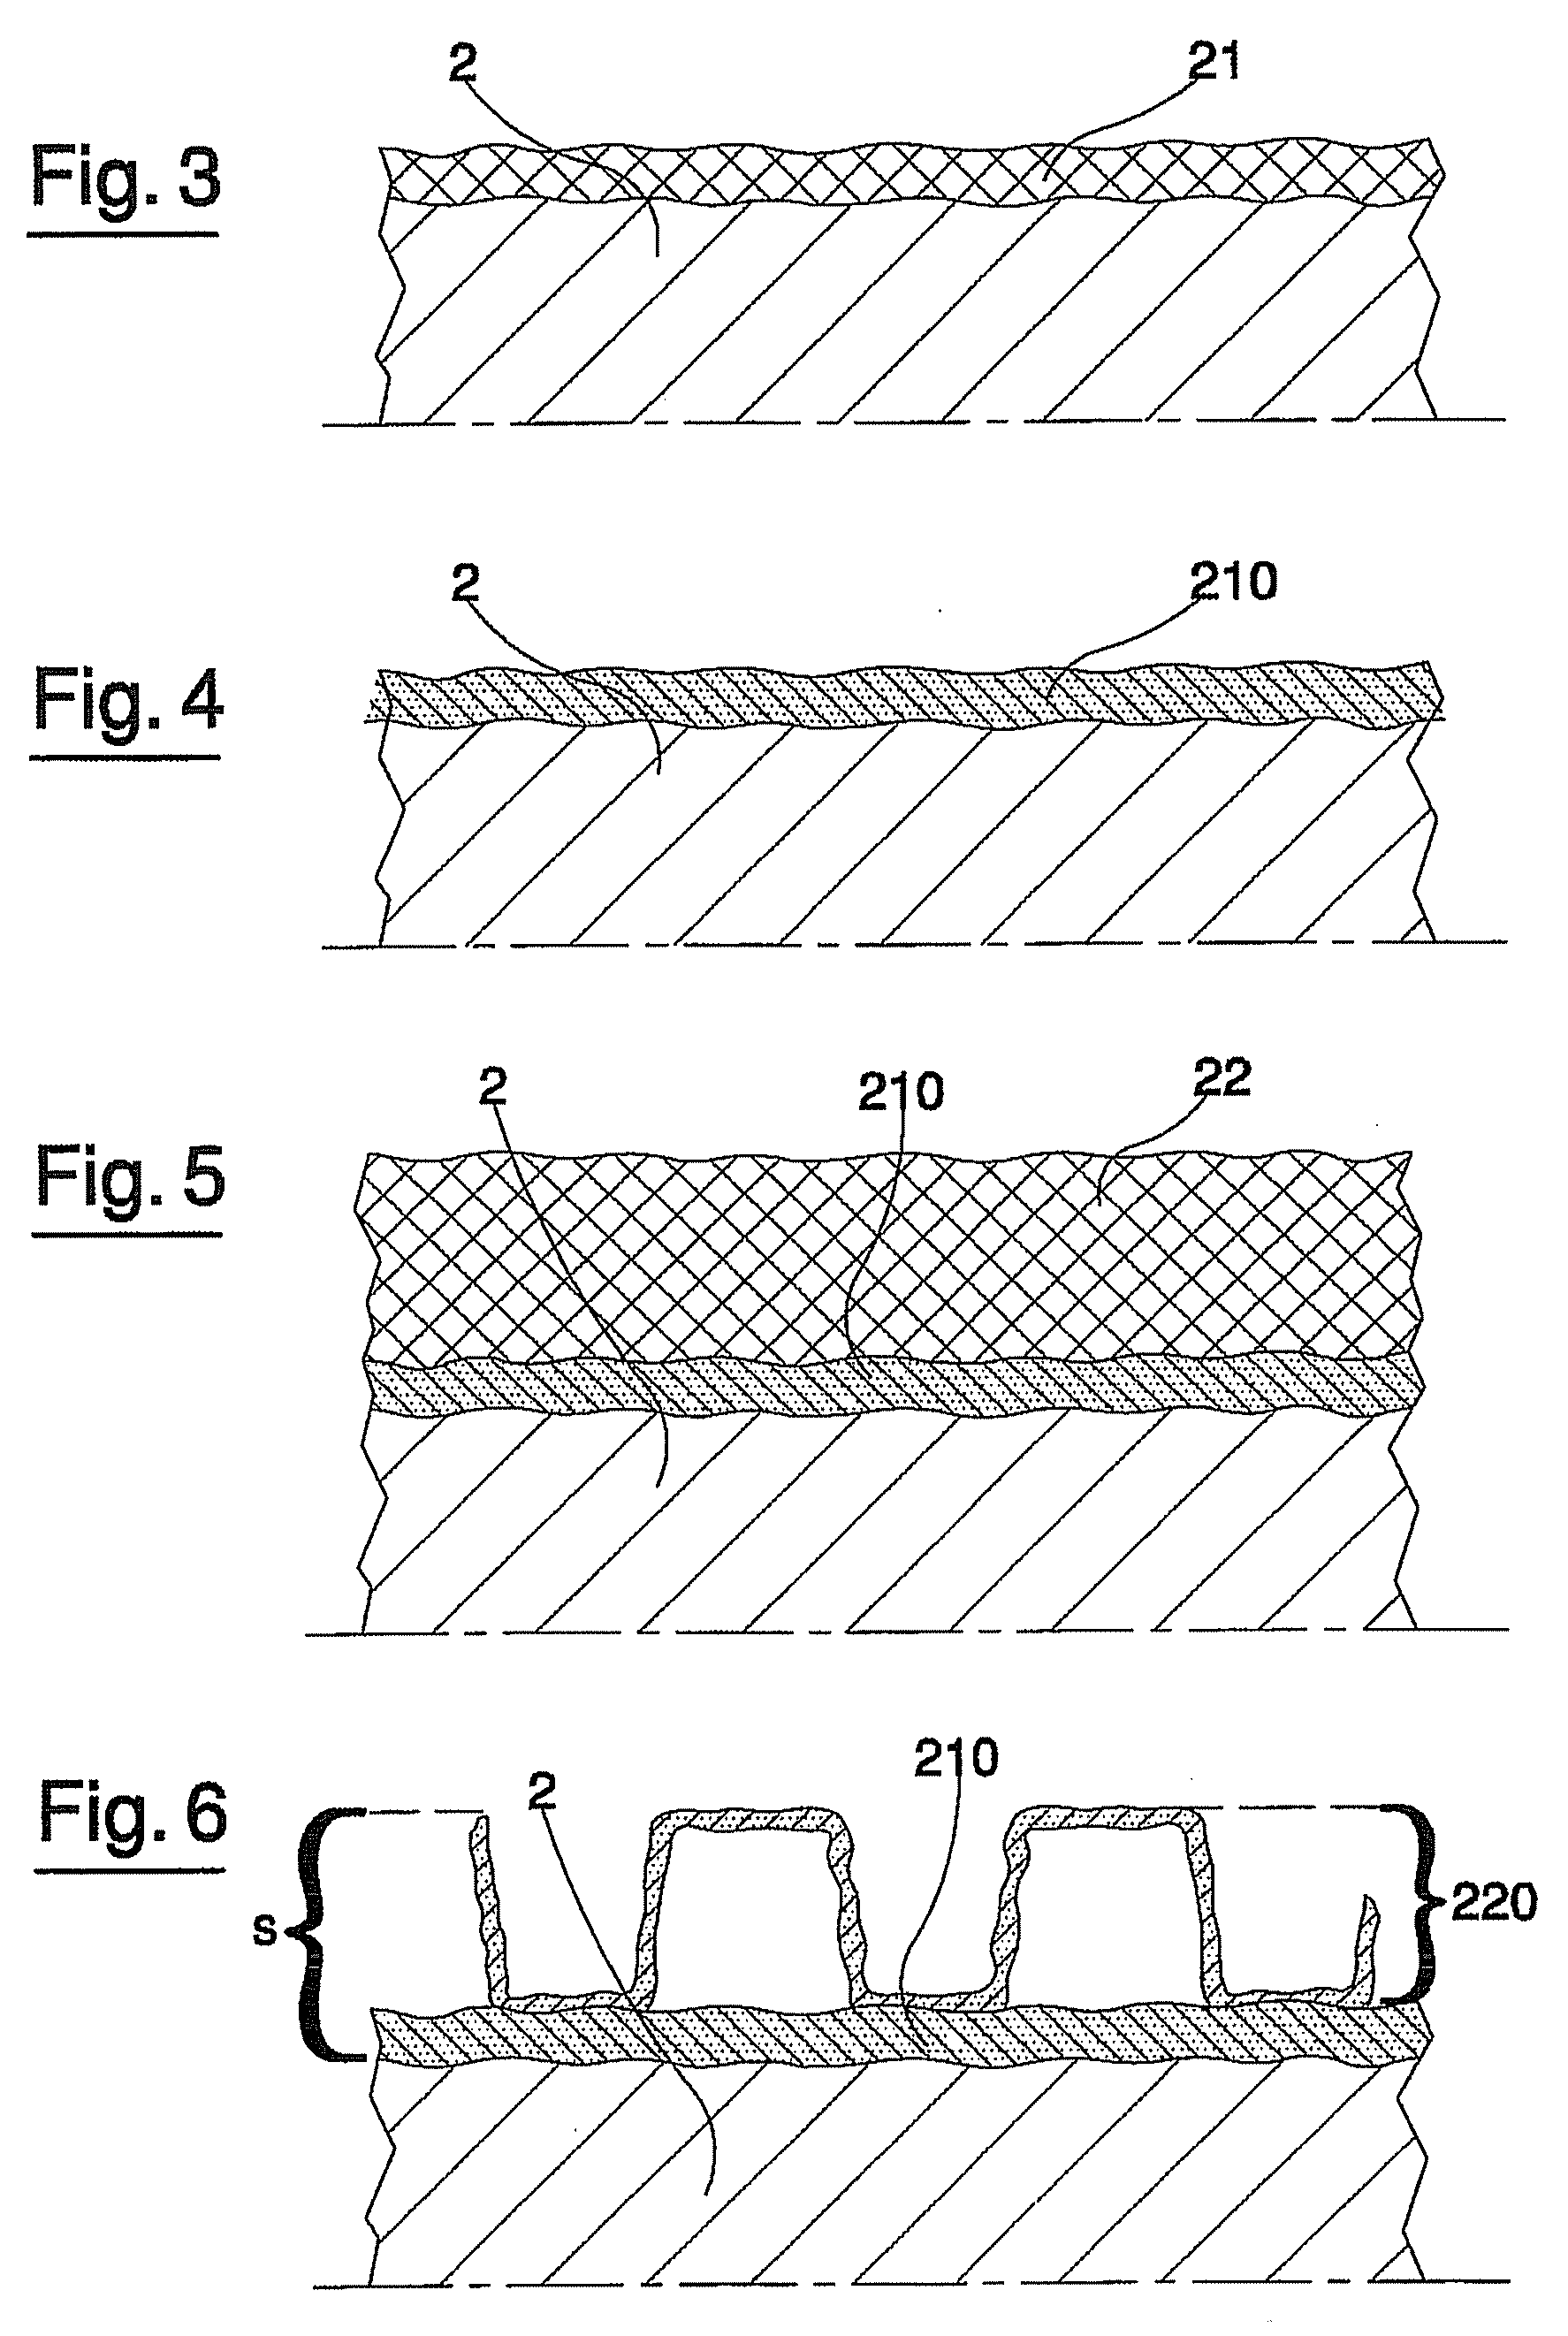 Method for Production of a Coated Endovascular Device